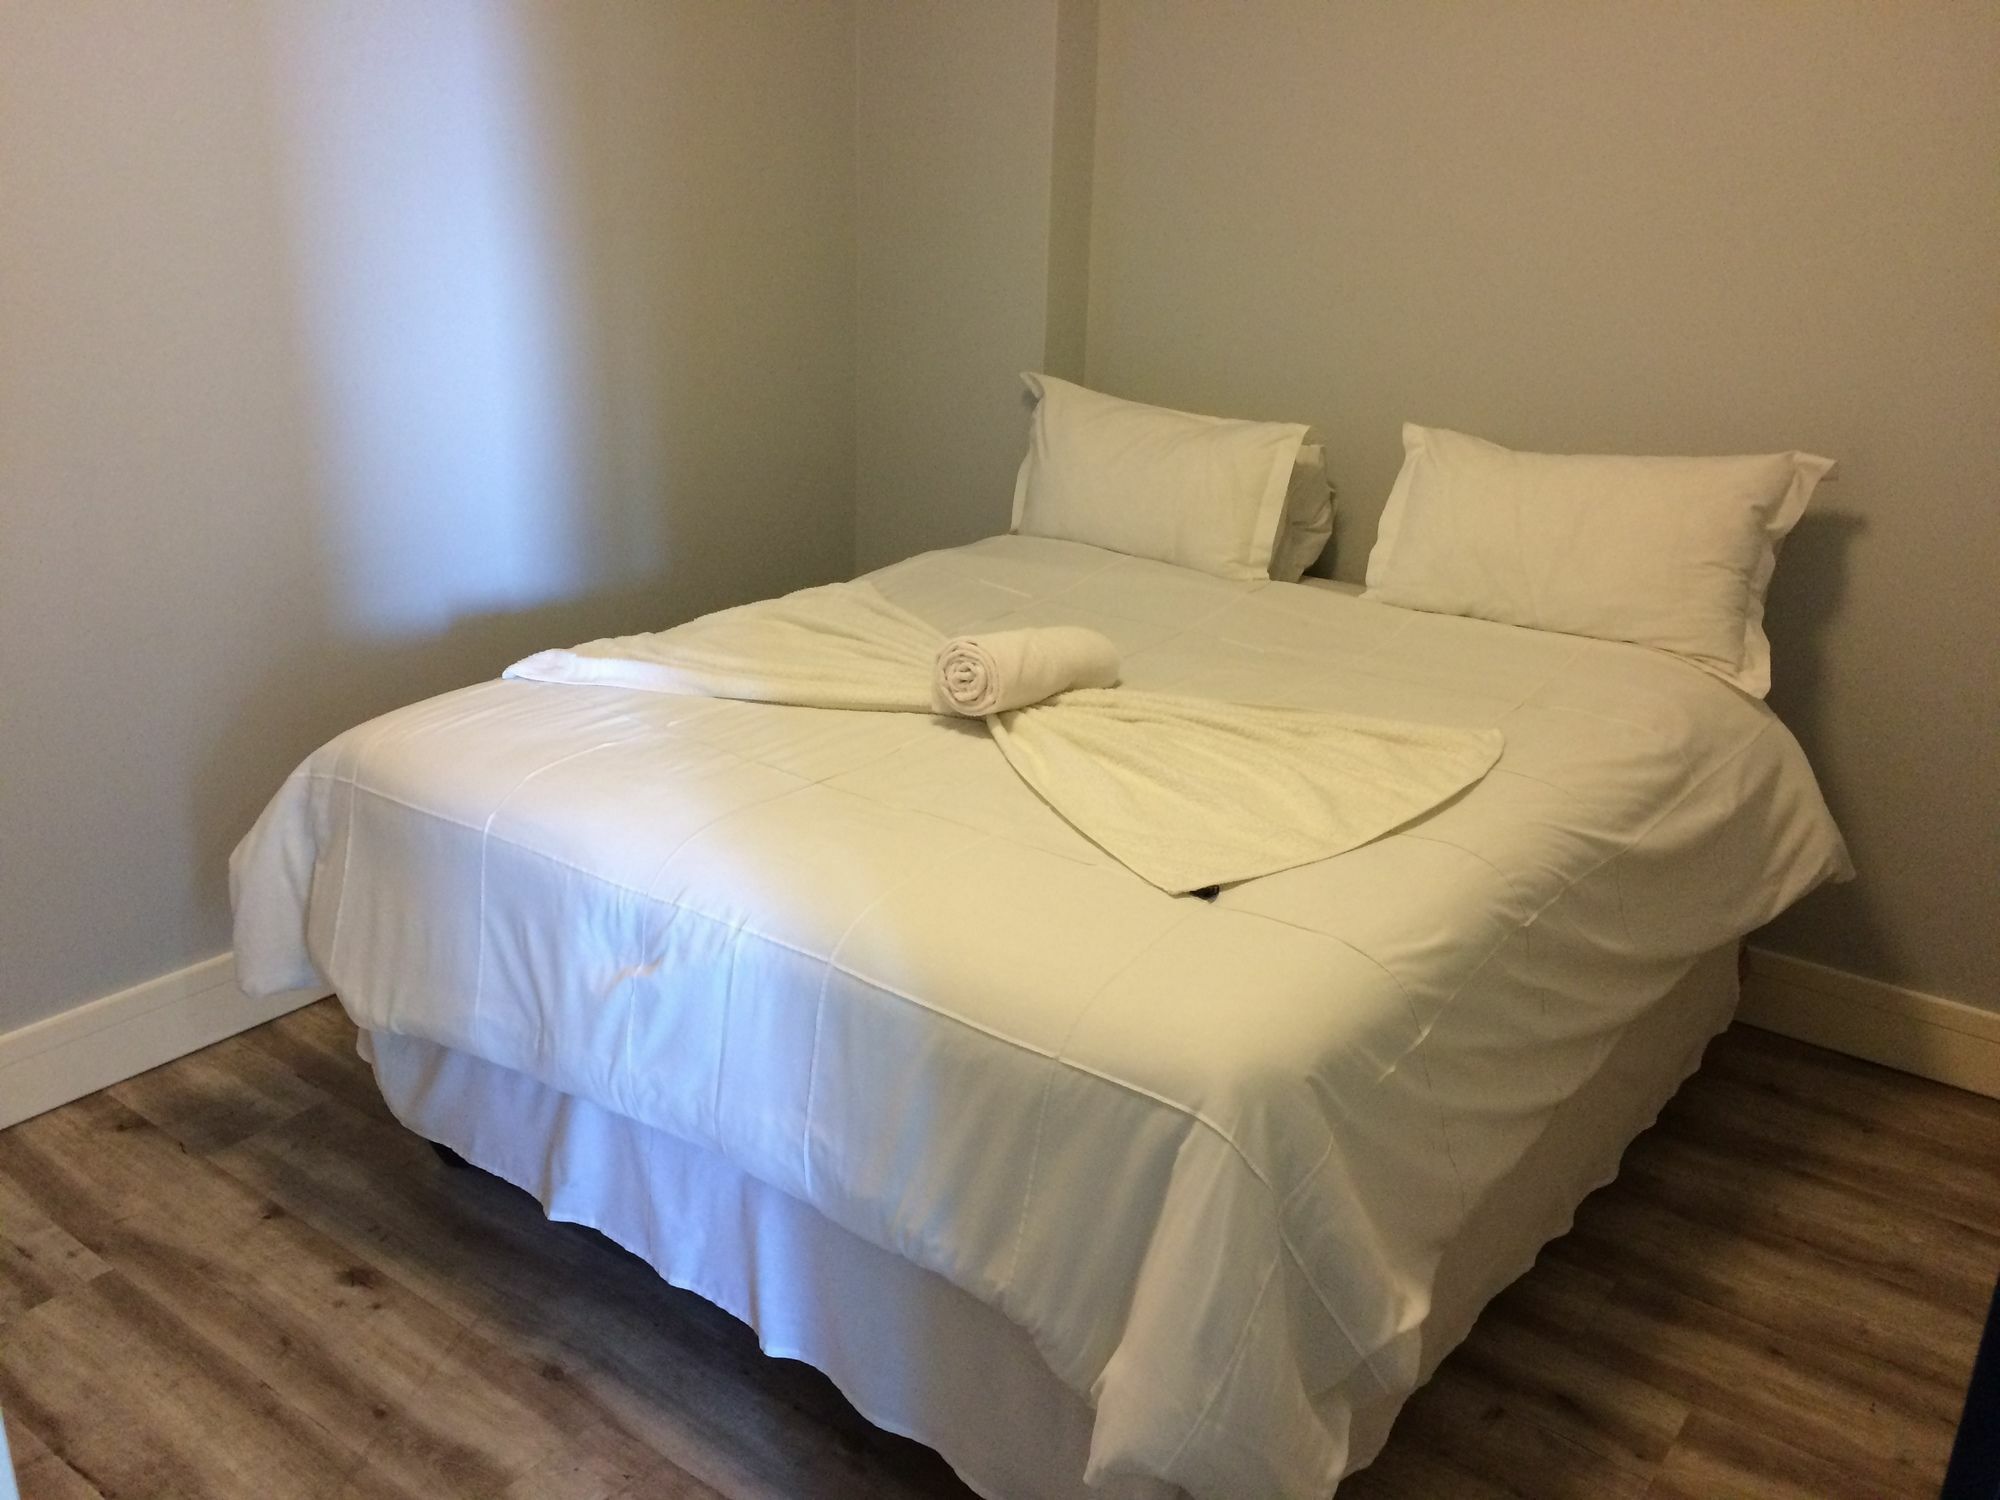 77 On Independence Self Catering Apartment 温特和克 外观 照片